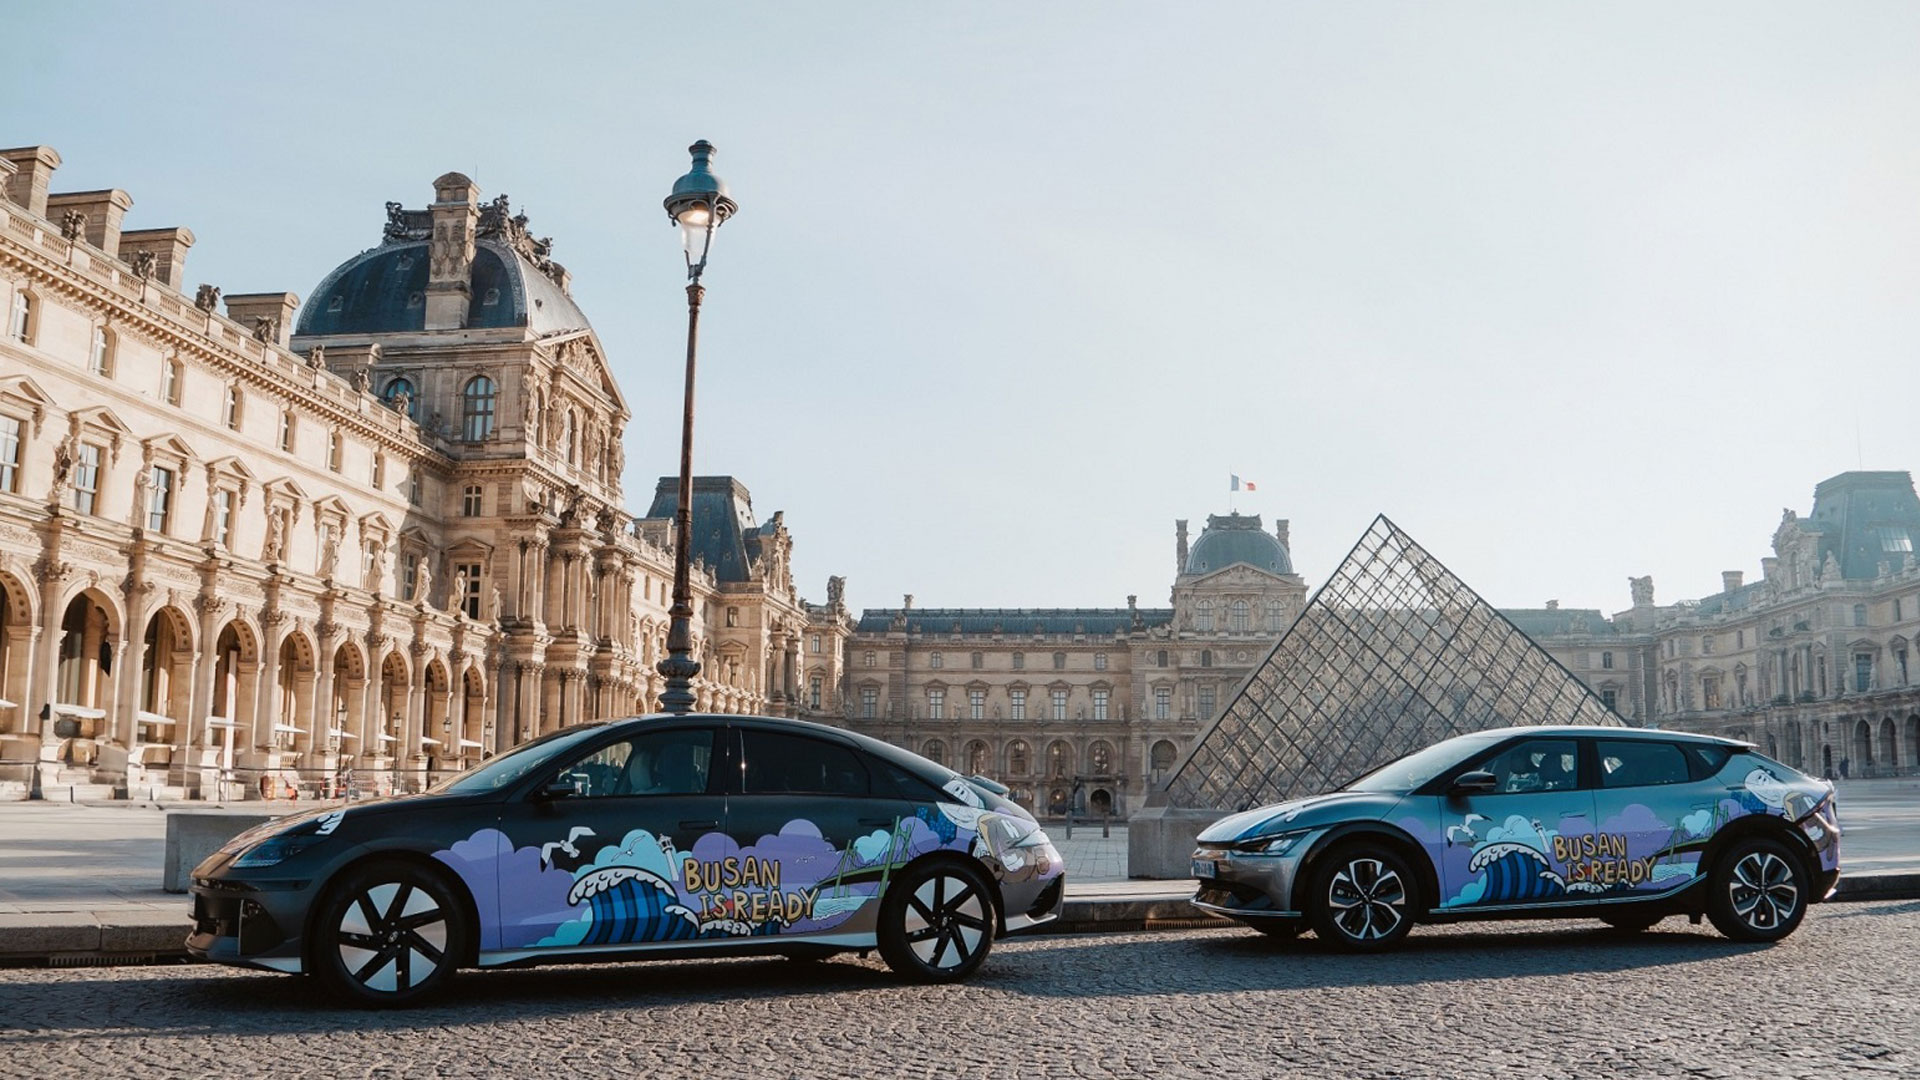 Hyundai Motor Group Art Cars Rally in Paris to Support Busan’s Final Bid to Host 2030 World Expo